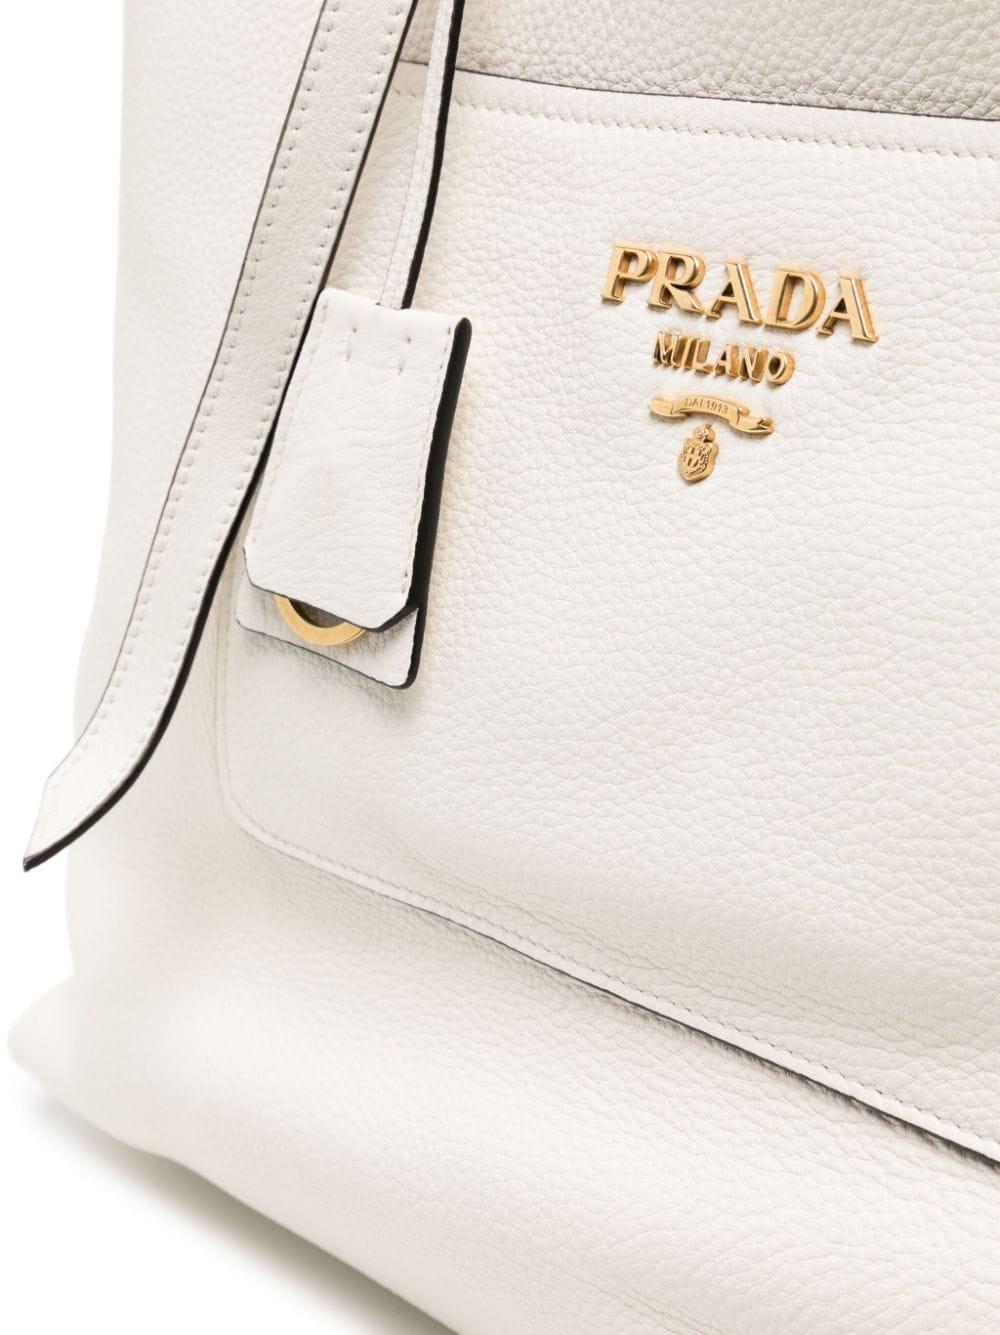 * White
* Calf leather
* Gold-tone logo lettering
* Two long top handles
* Top zip fastening
* Main compartment
* Internal zip-fastening pocket
* Slip pocket to the front
* Leather tag
* Very Good Condition: This pre-owned item is near-perfect;